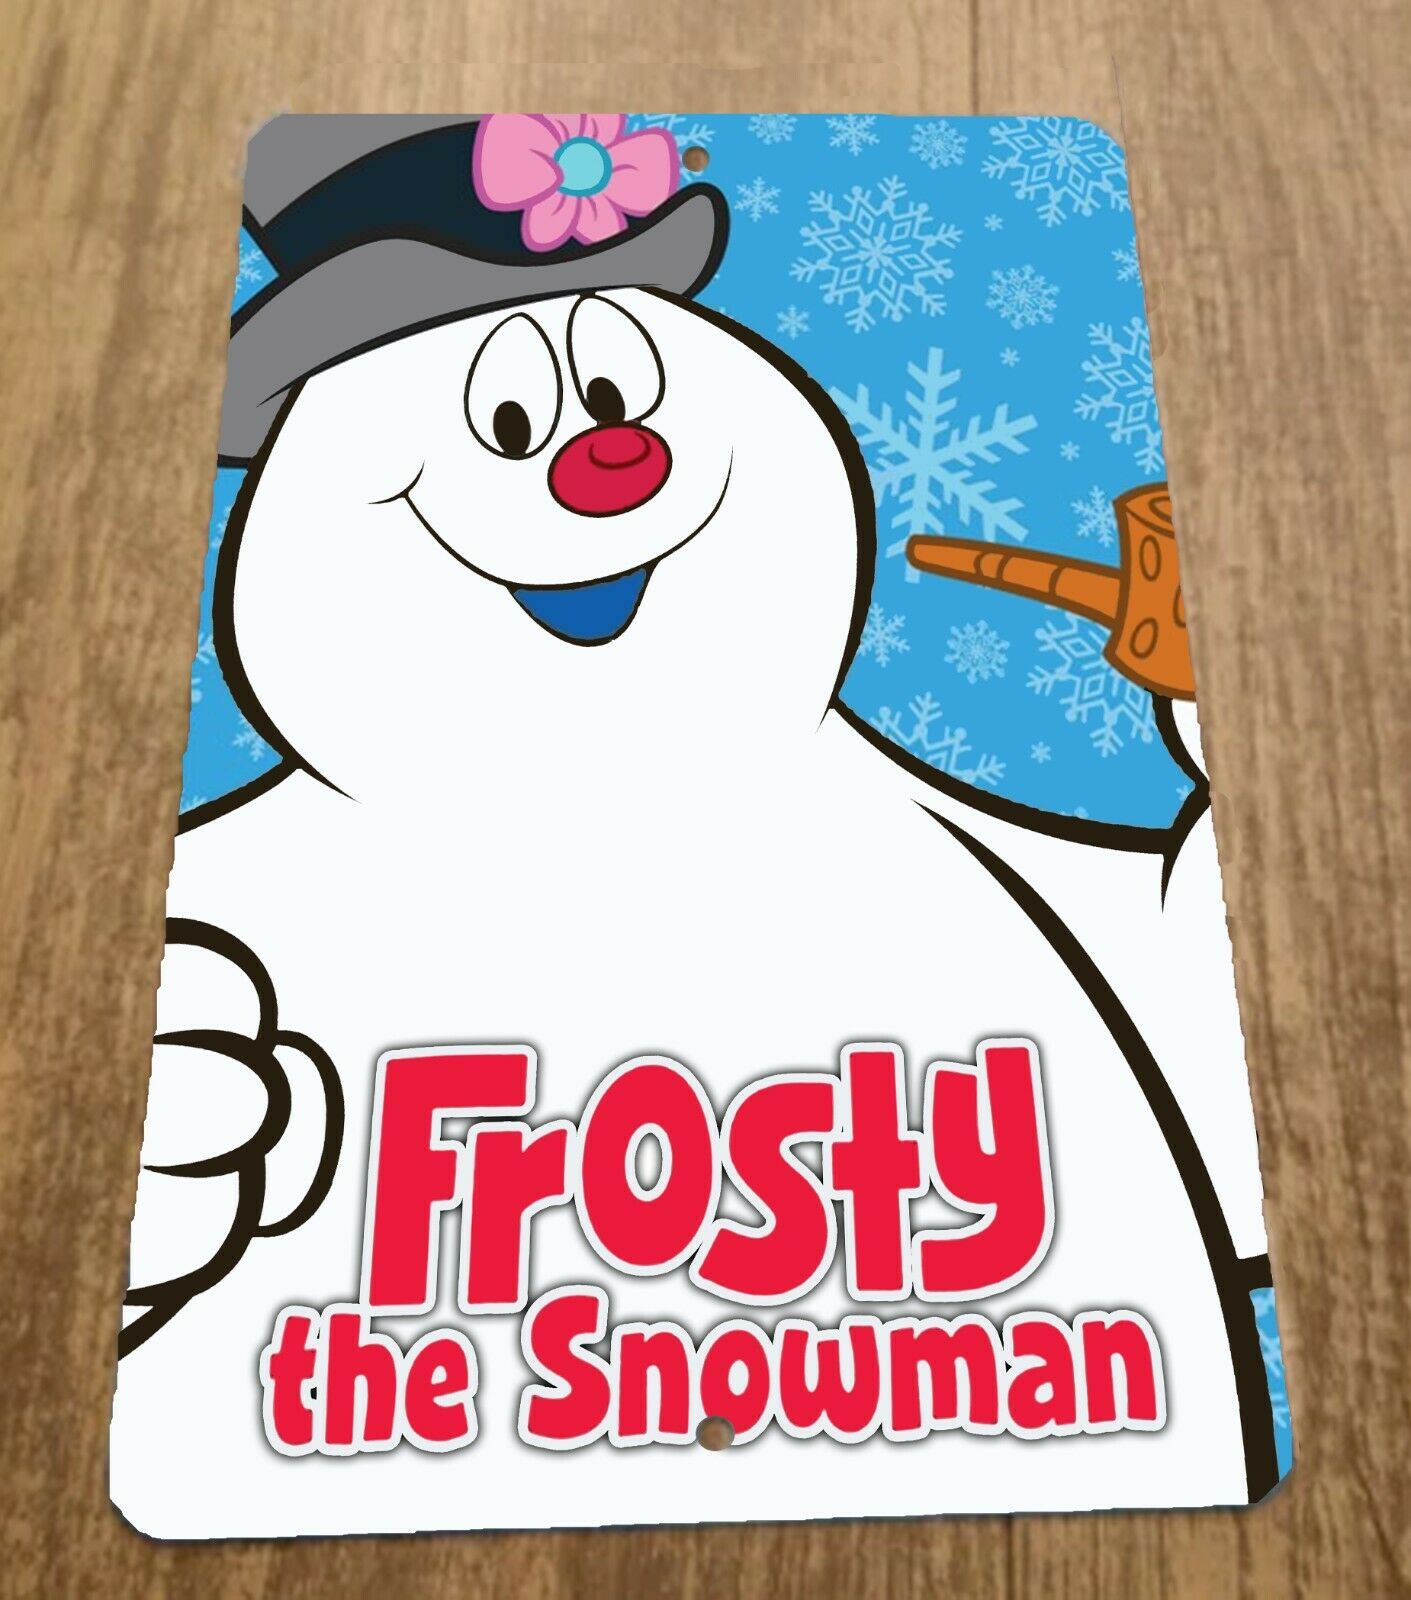 Frosty The Snowman 8x12 Metal Wall Sign Classic Carton Movie Poster